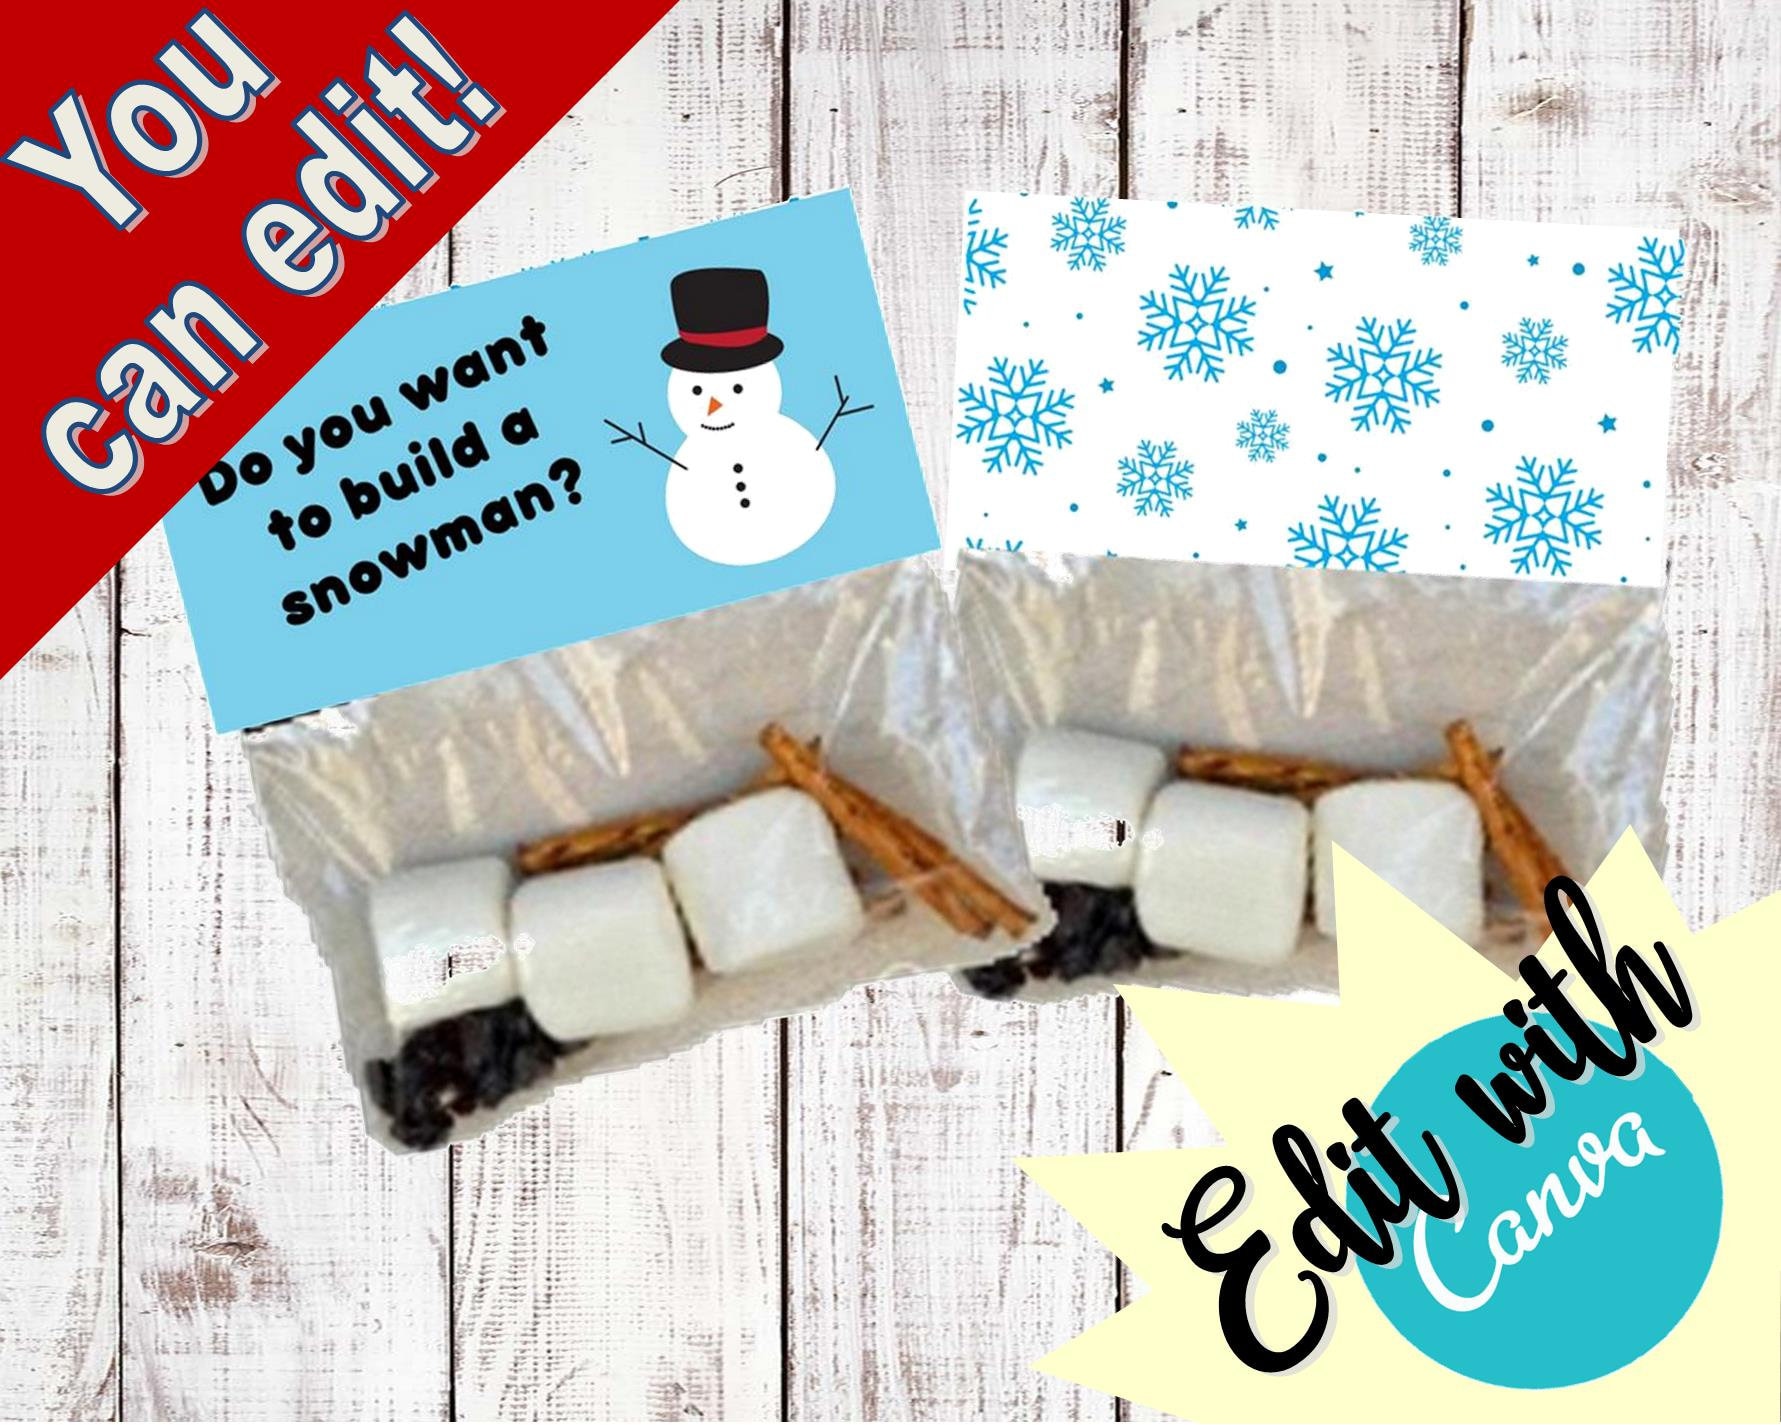 Build a Snowman Kit Treat Bag Toppers, Christmas Treat Gift Tag for Kids,  Friend Gift for Kids